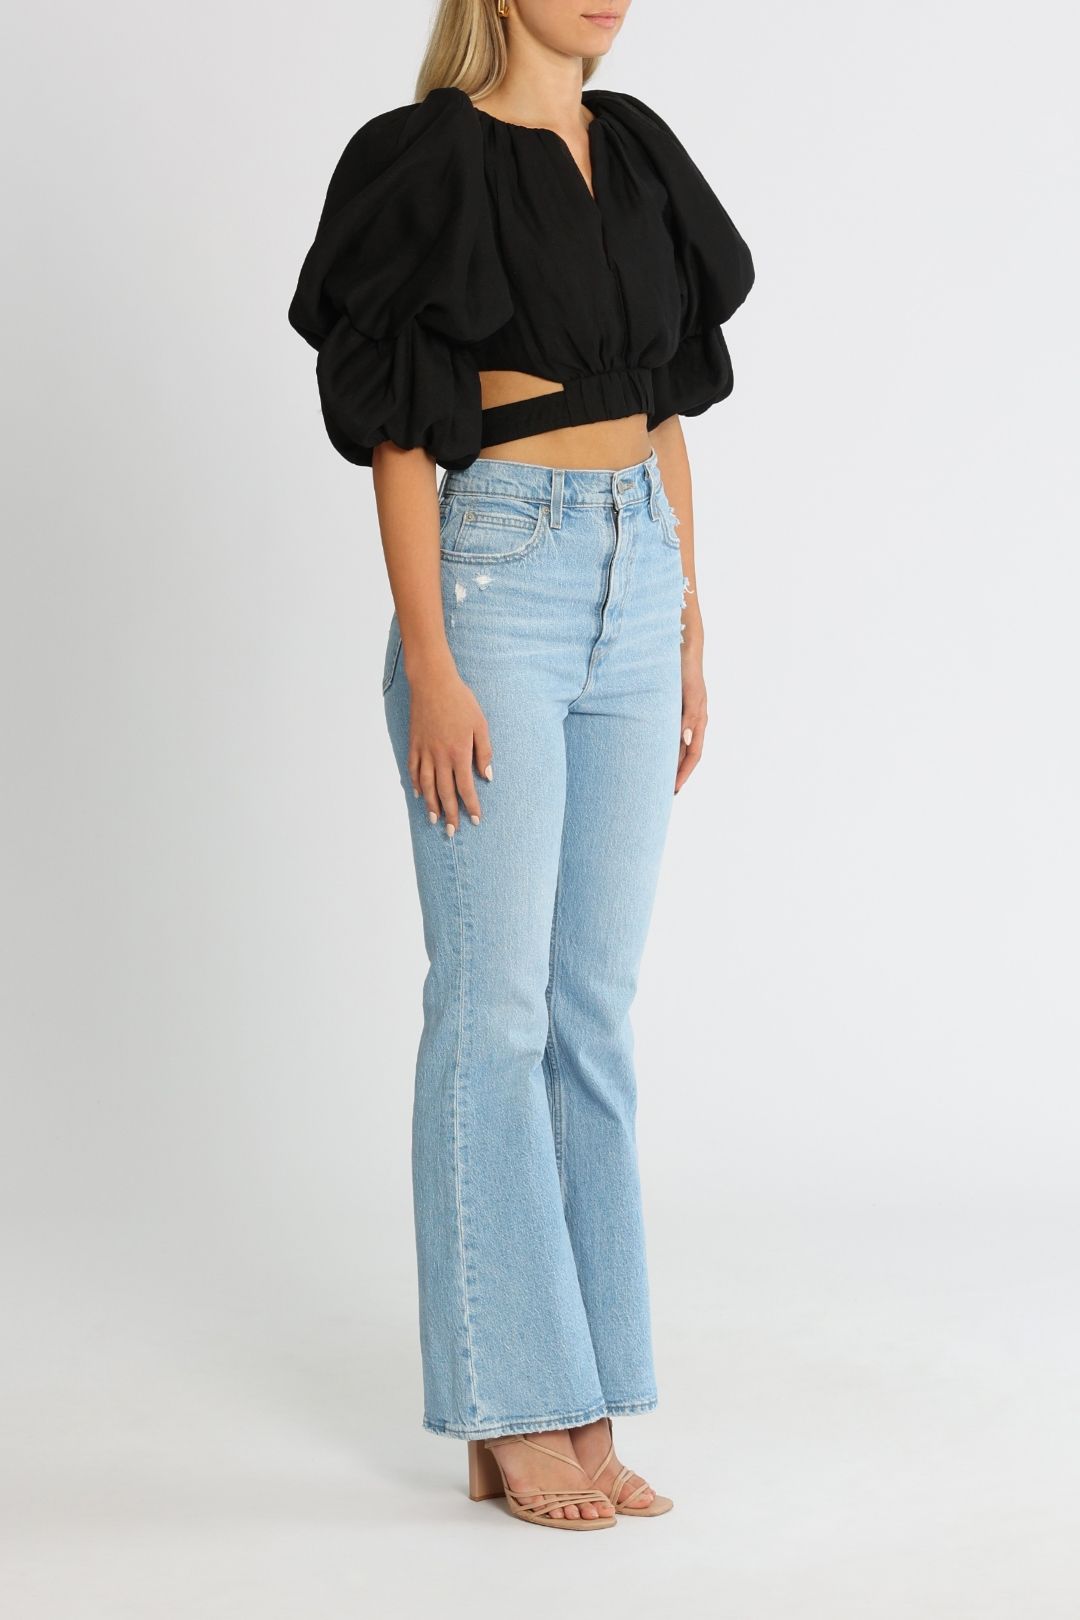 AJE Impression Cut Out Top Black Cropped